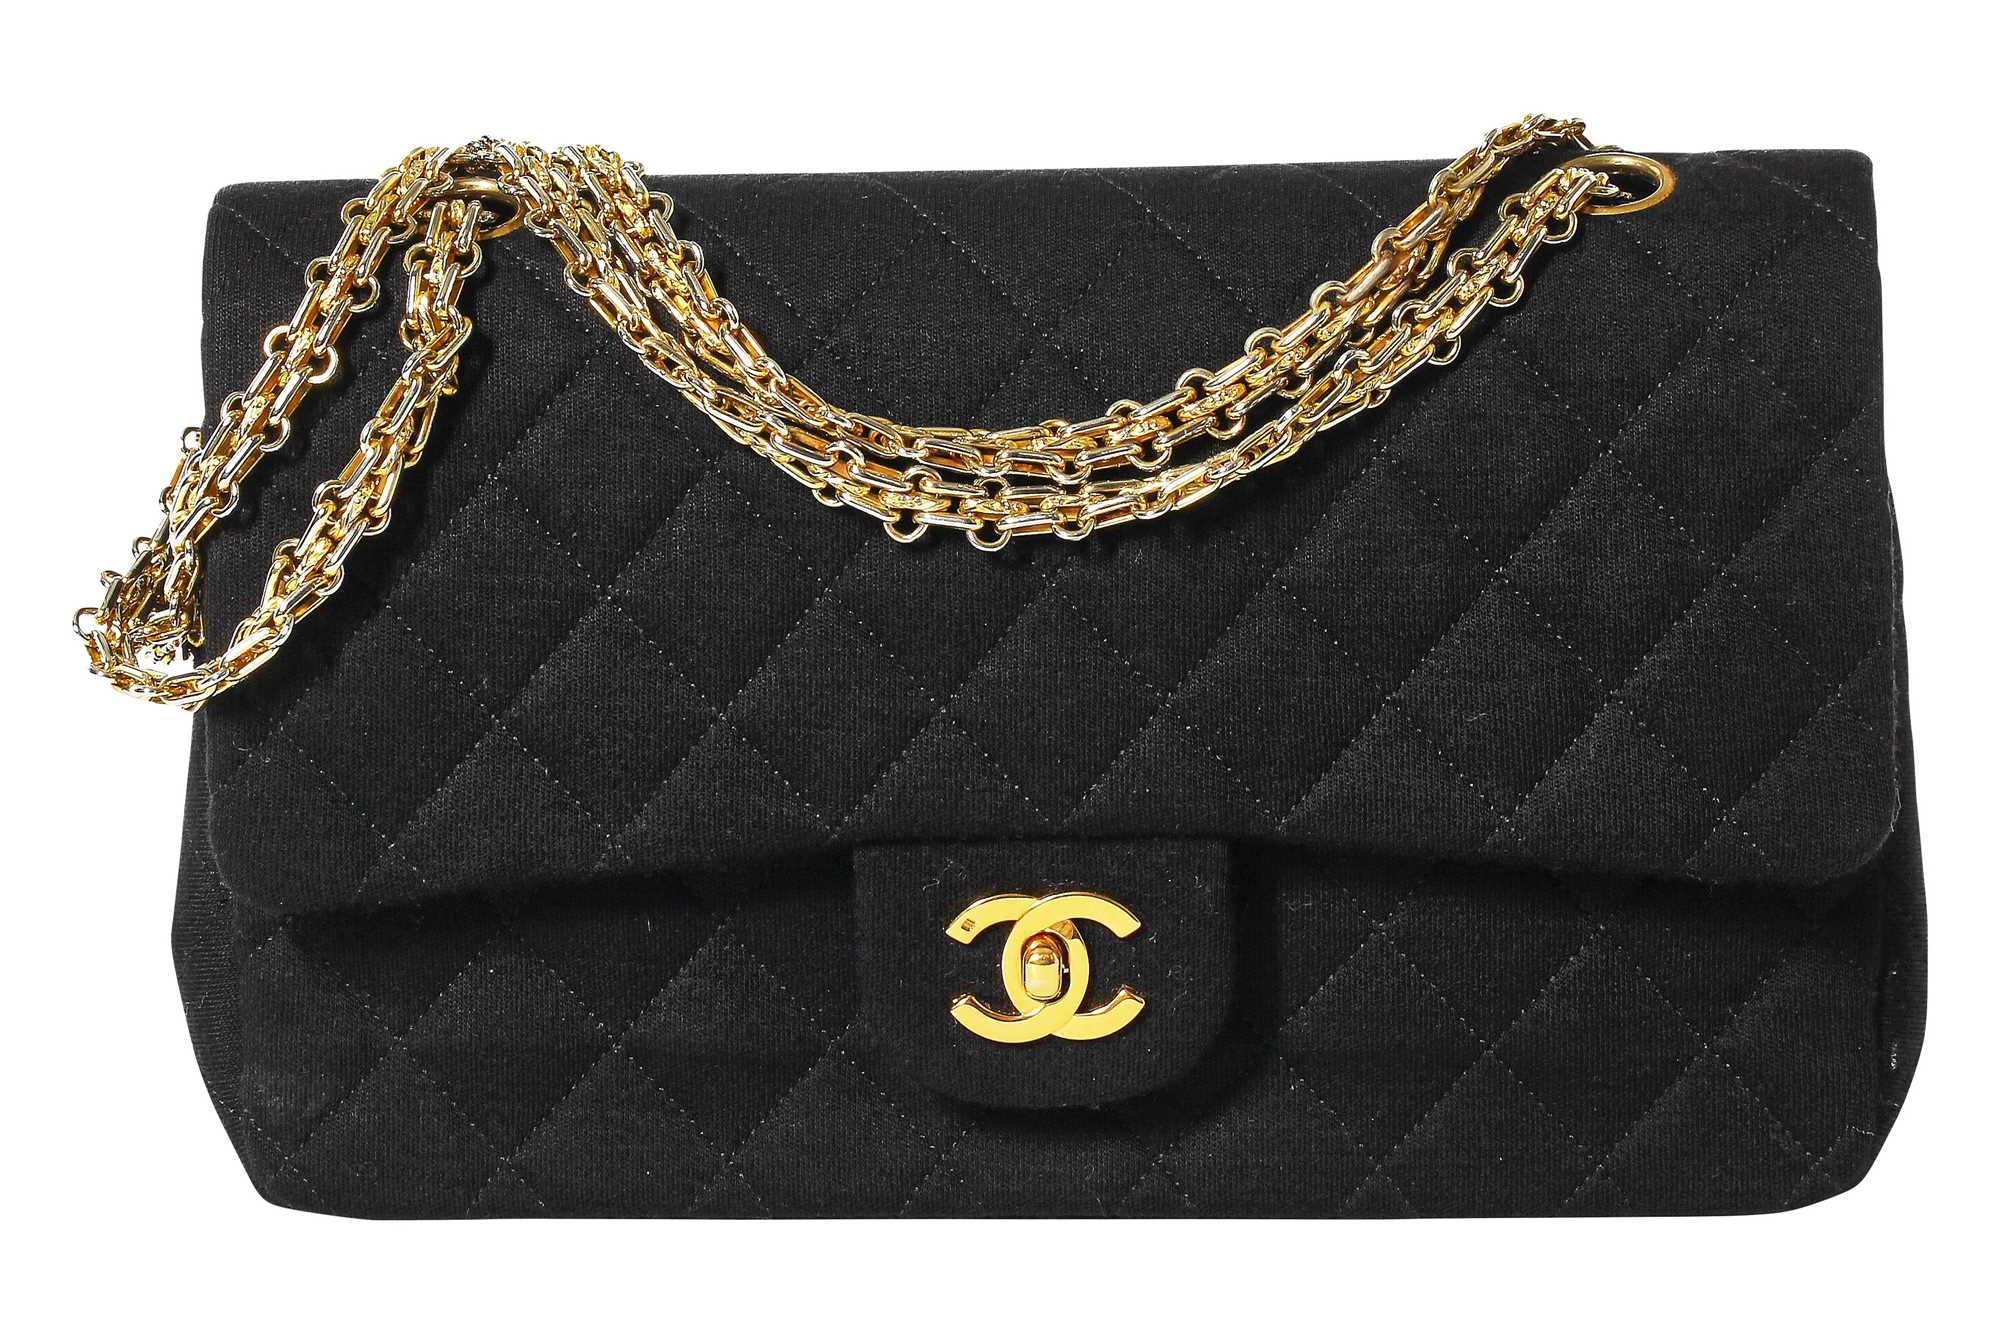 Lot 4 - A Chanel black quilted wool-jersey flap bag